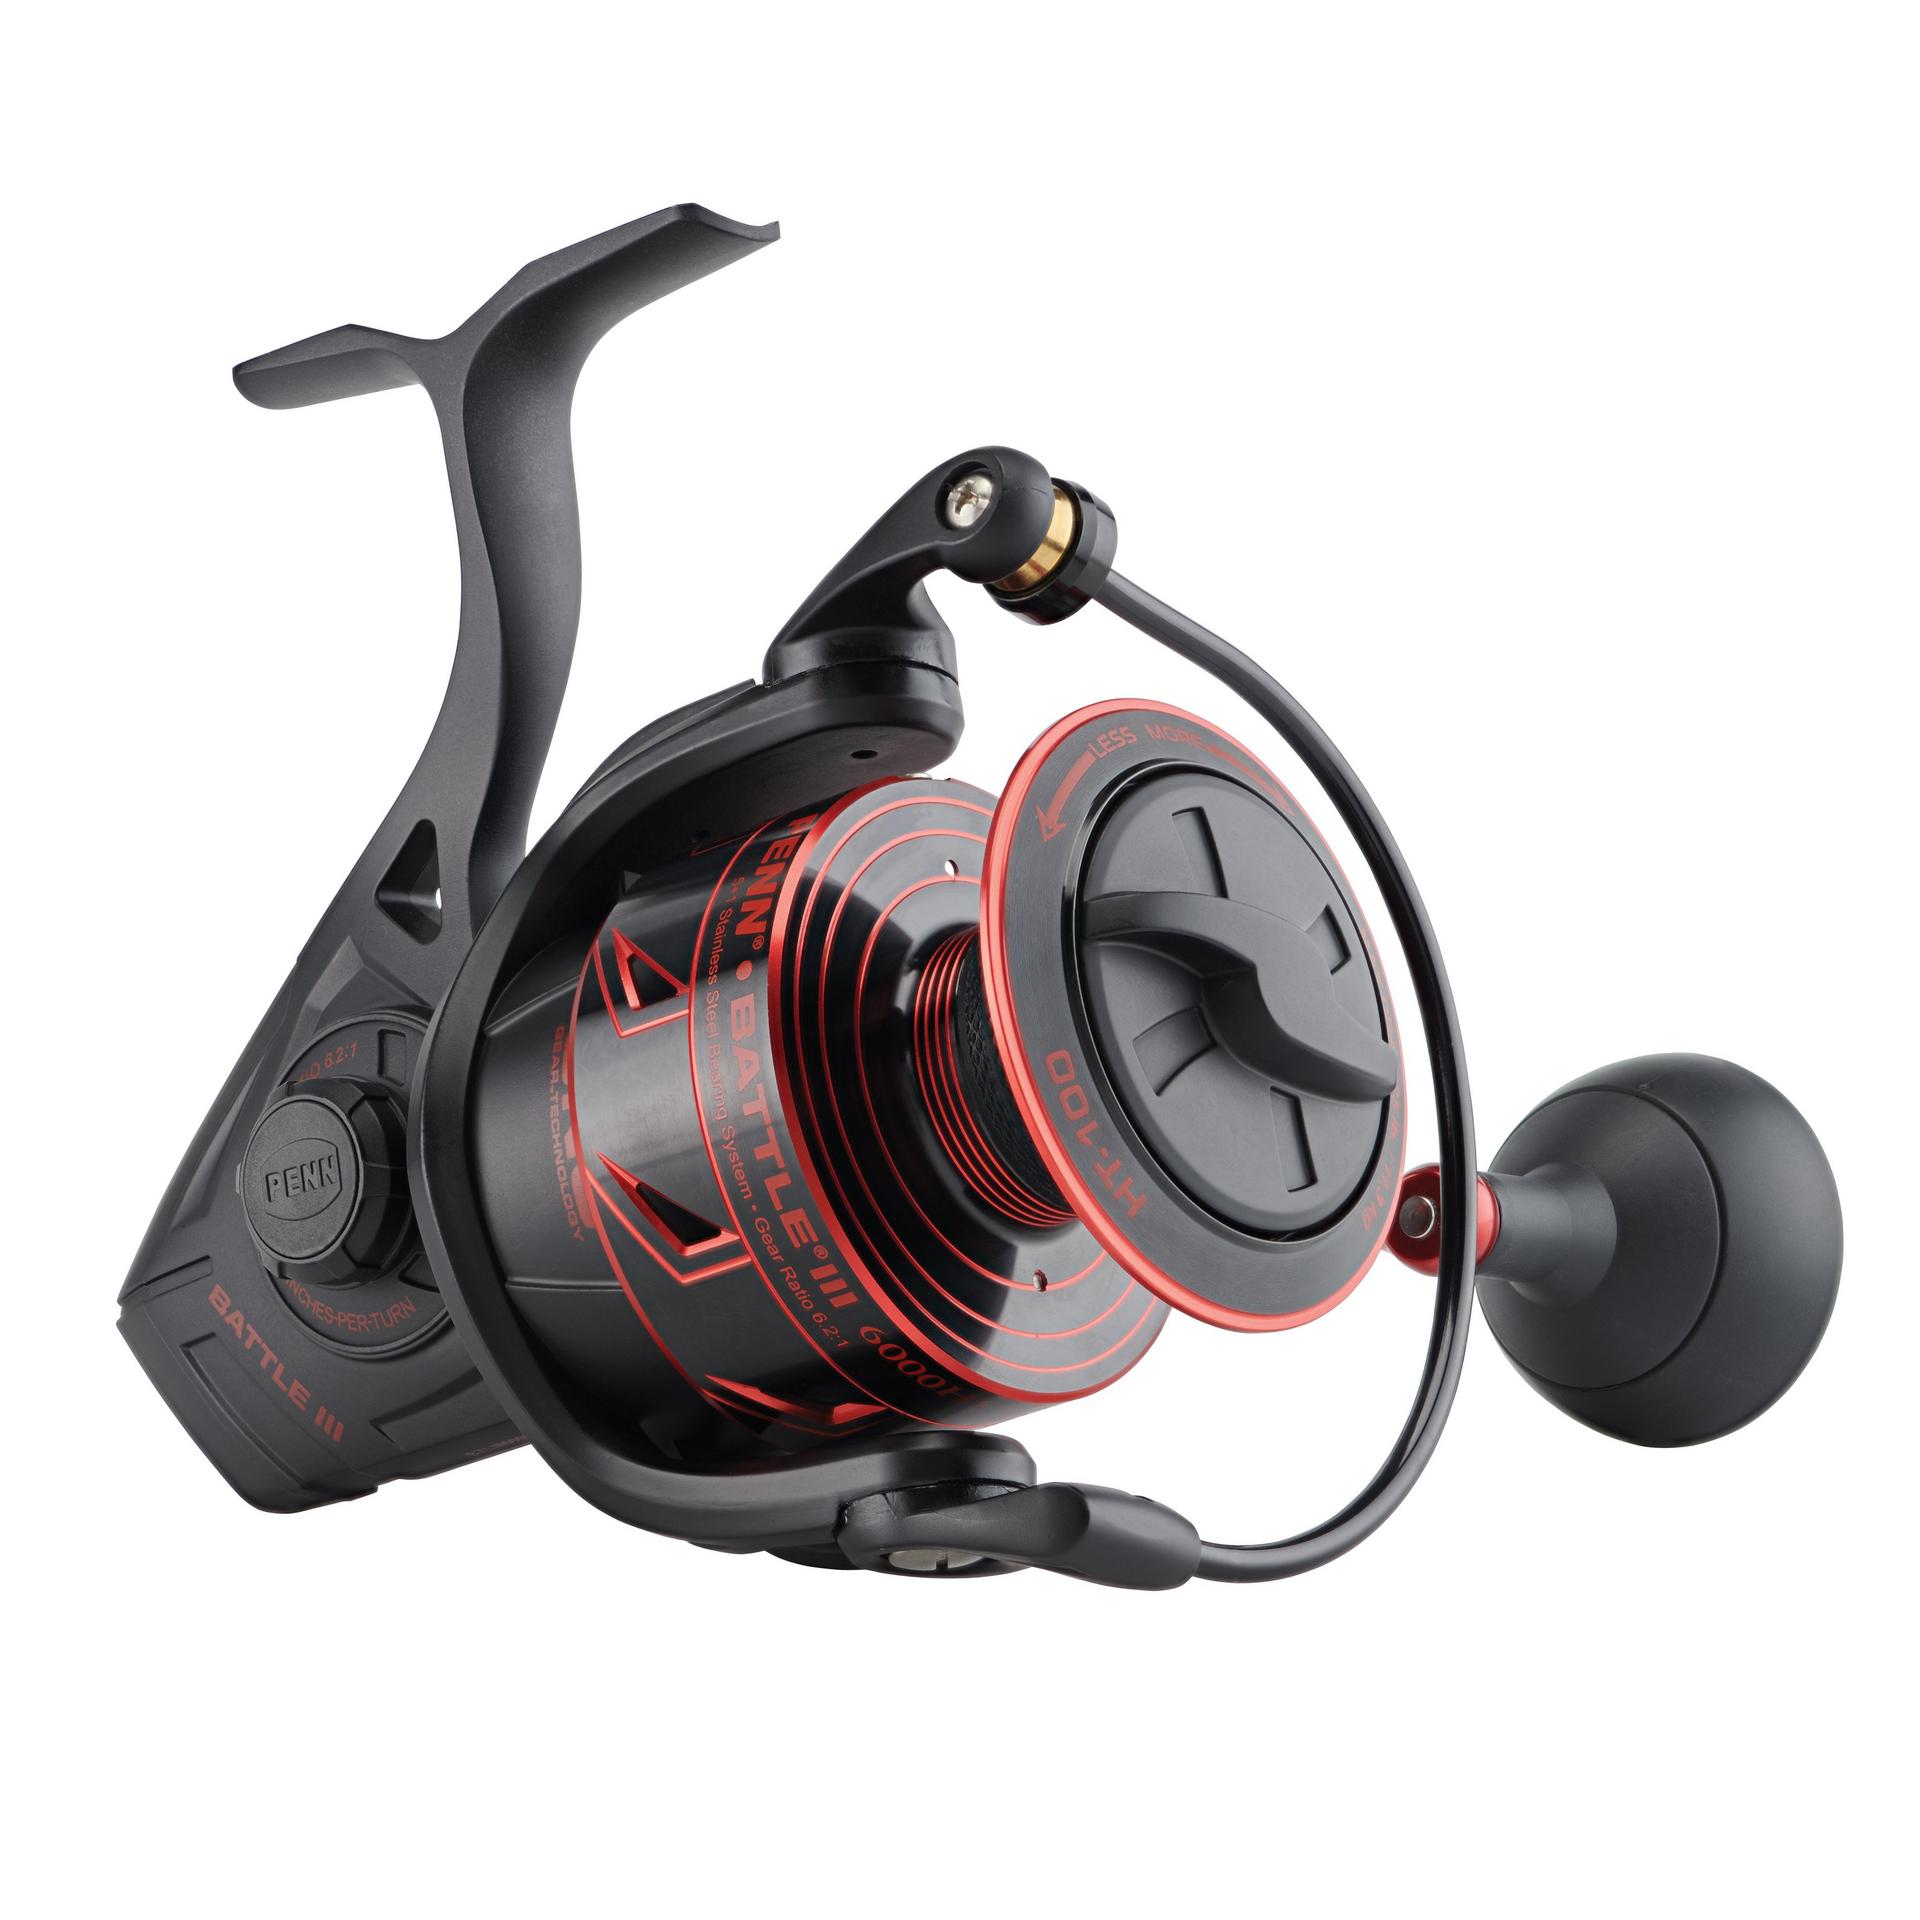 Penn off shore fishing reel. - general for sale - by owner